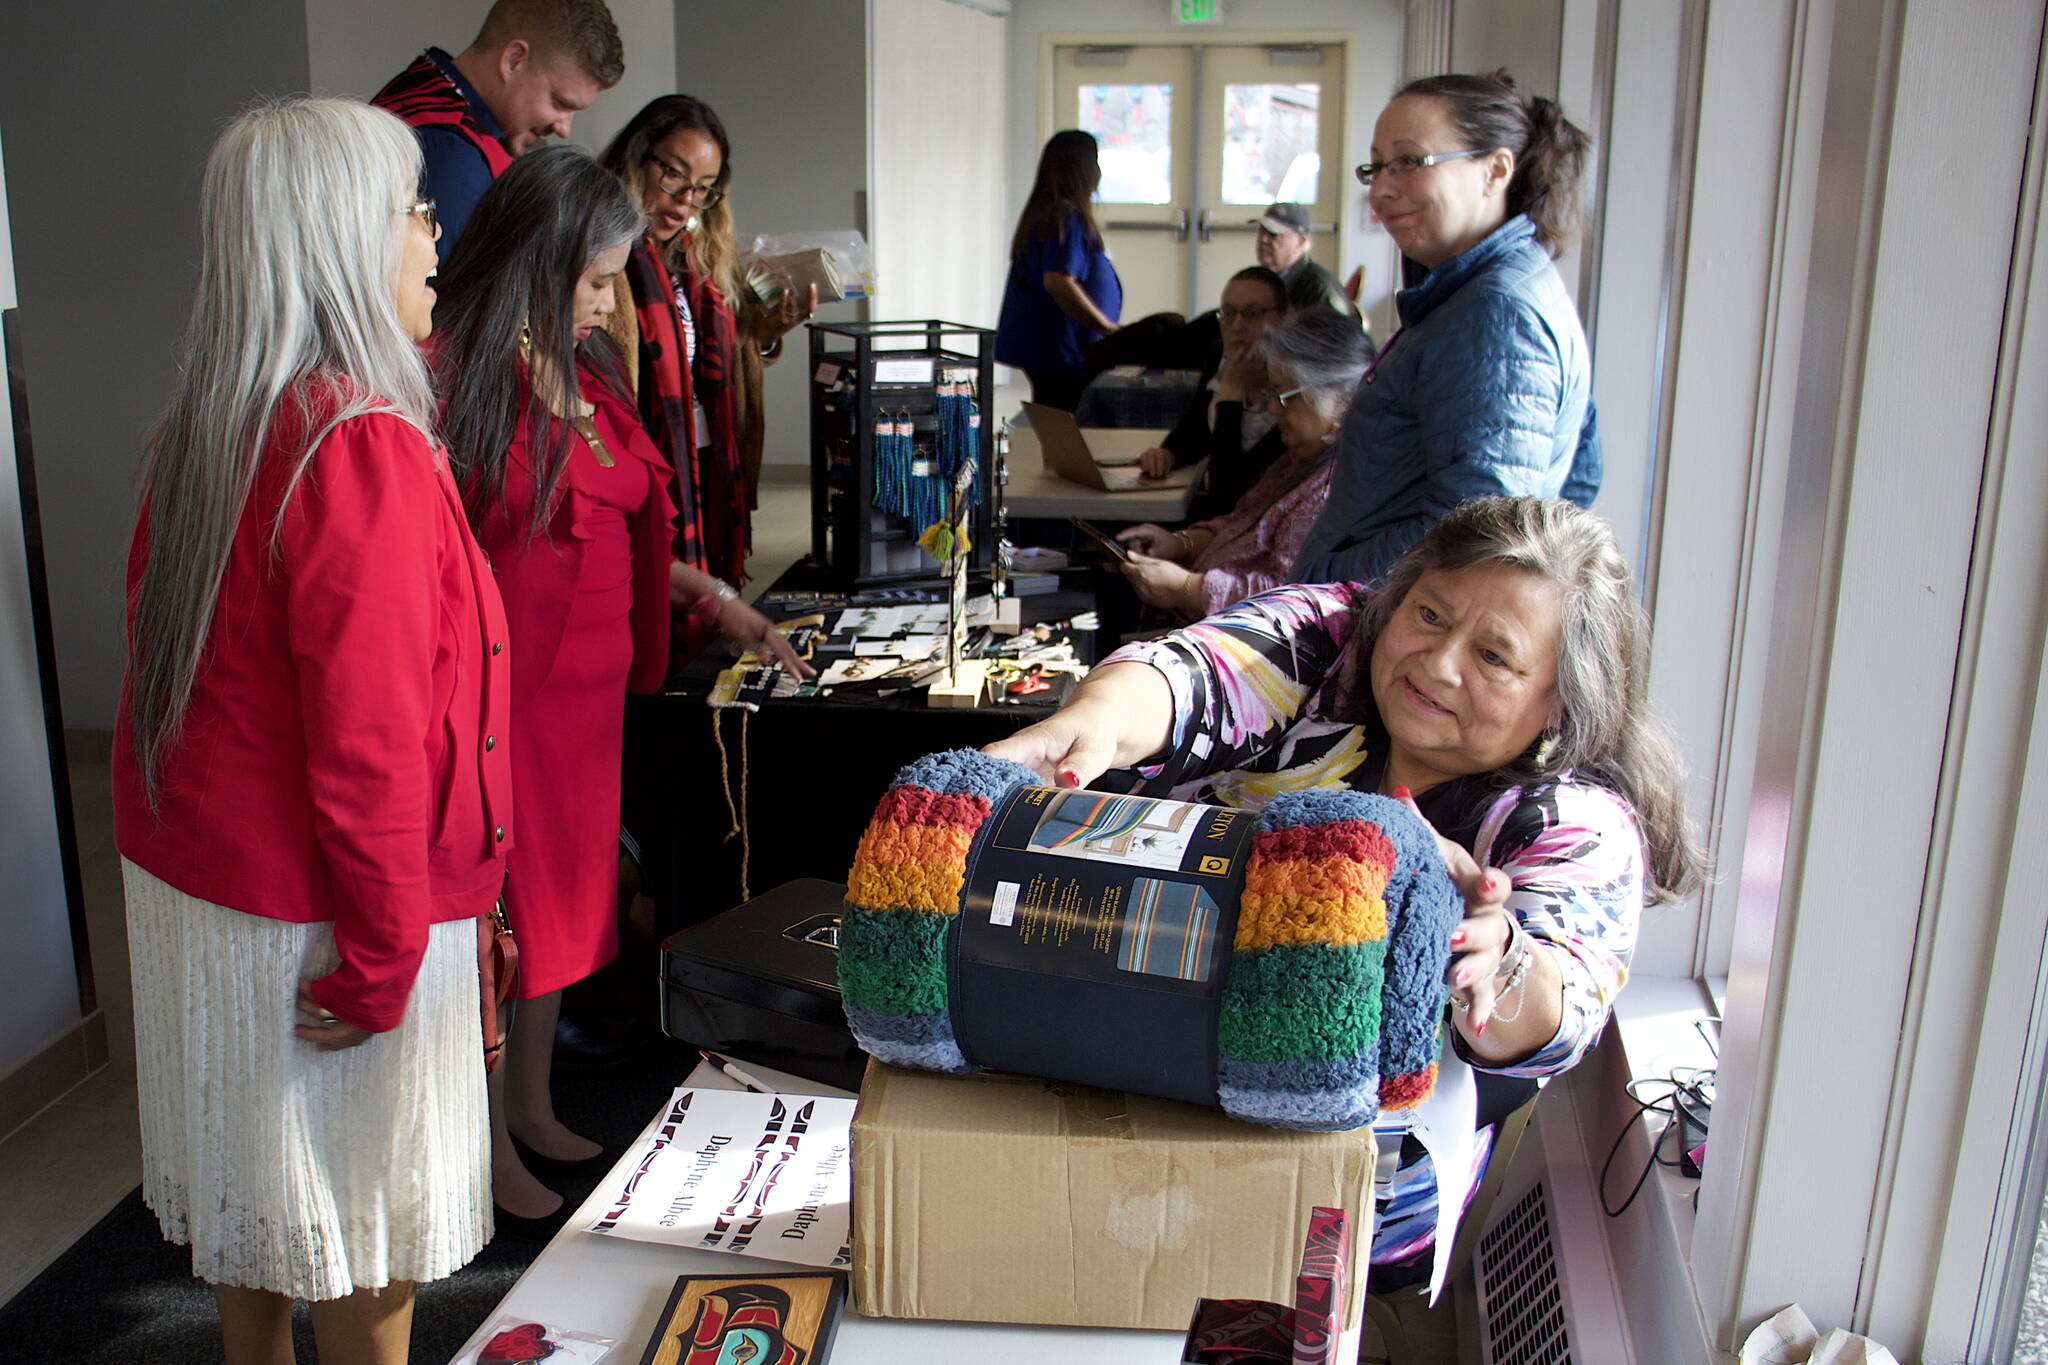 Cindy Pederson, sets up a display table for raffle items in a hallway at Elizabeth Peratrovich Hall during the  88th annual Tribal Assembly of the Central Council of the Tlingit and Haida Indian Tribes of Alaska. Peterson, a Seattle resident and delegate for nearly 20 years until taking a job with the tribe’s COVID-19 relief program last year, was named the tribe’s Delegate/Citizen of the Year on Thursday. (Mark Sabbatini / Juneau Empire)